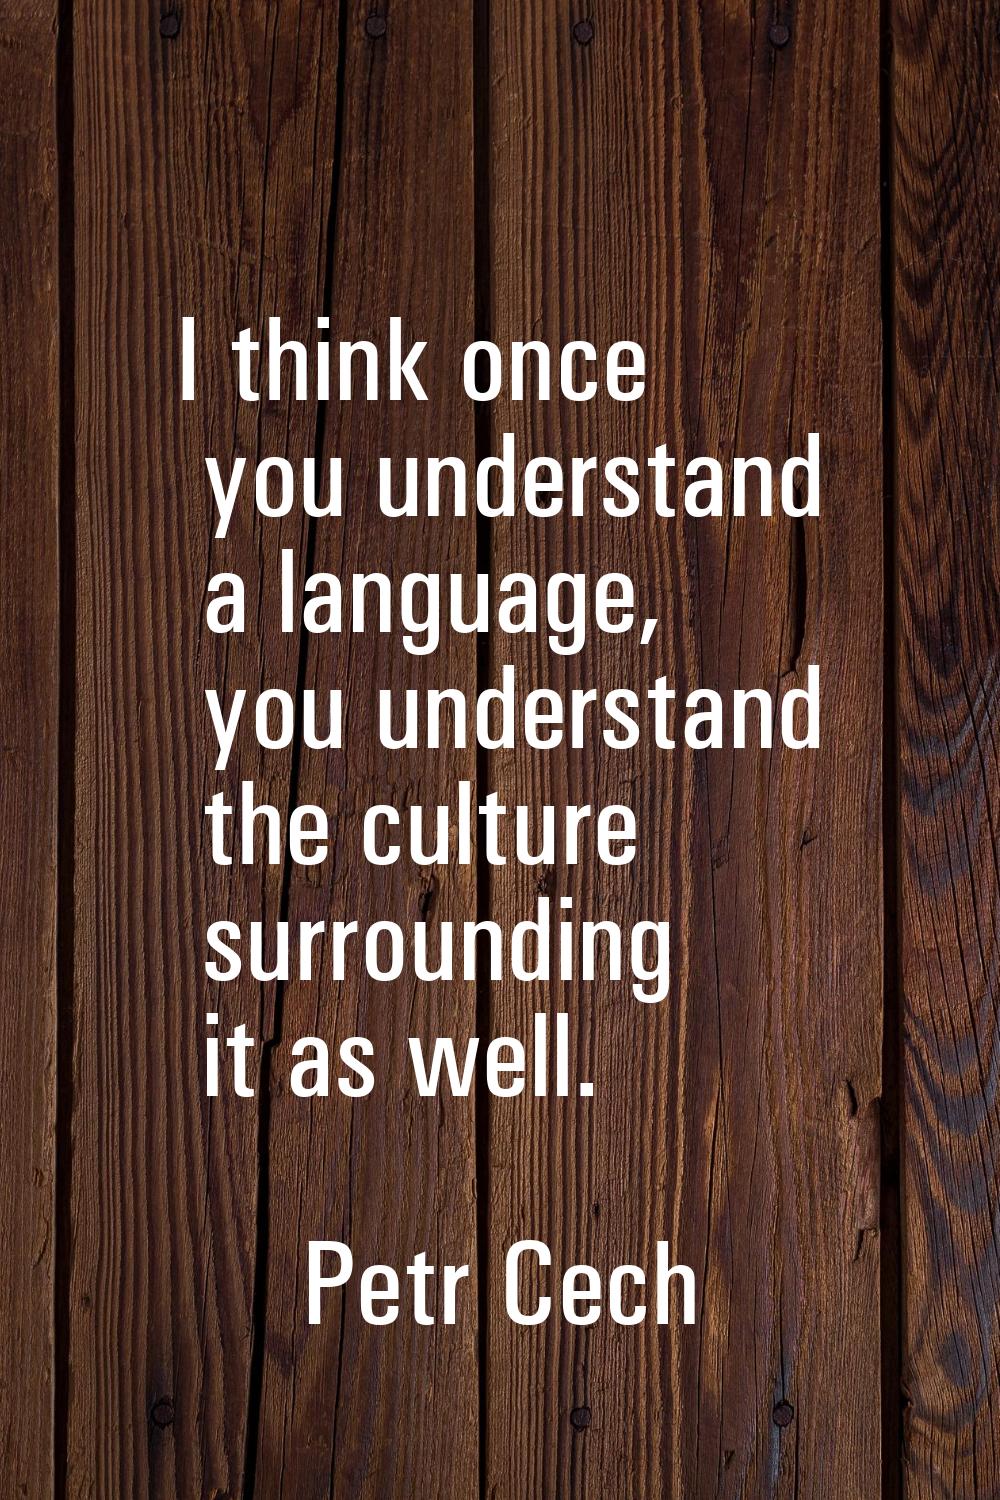 I think once you understand a language, you understand the culture surrounding it as well.